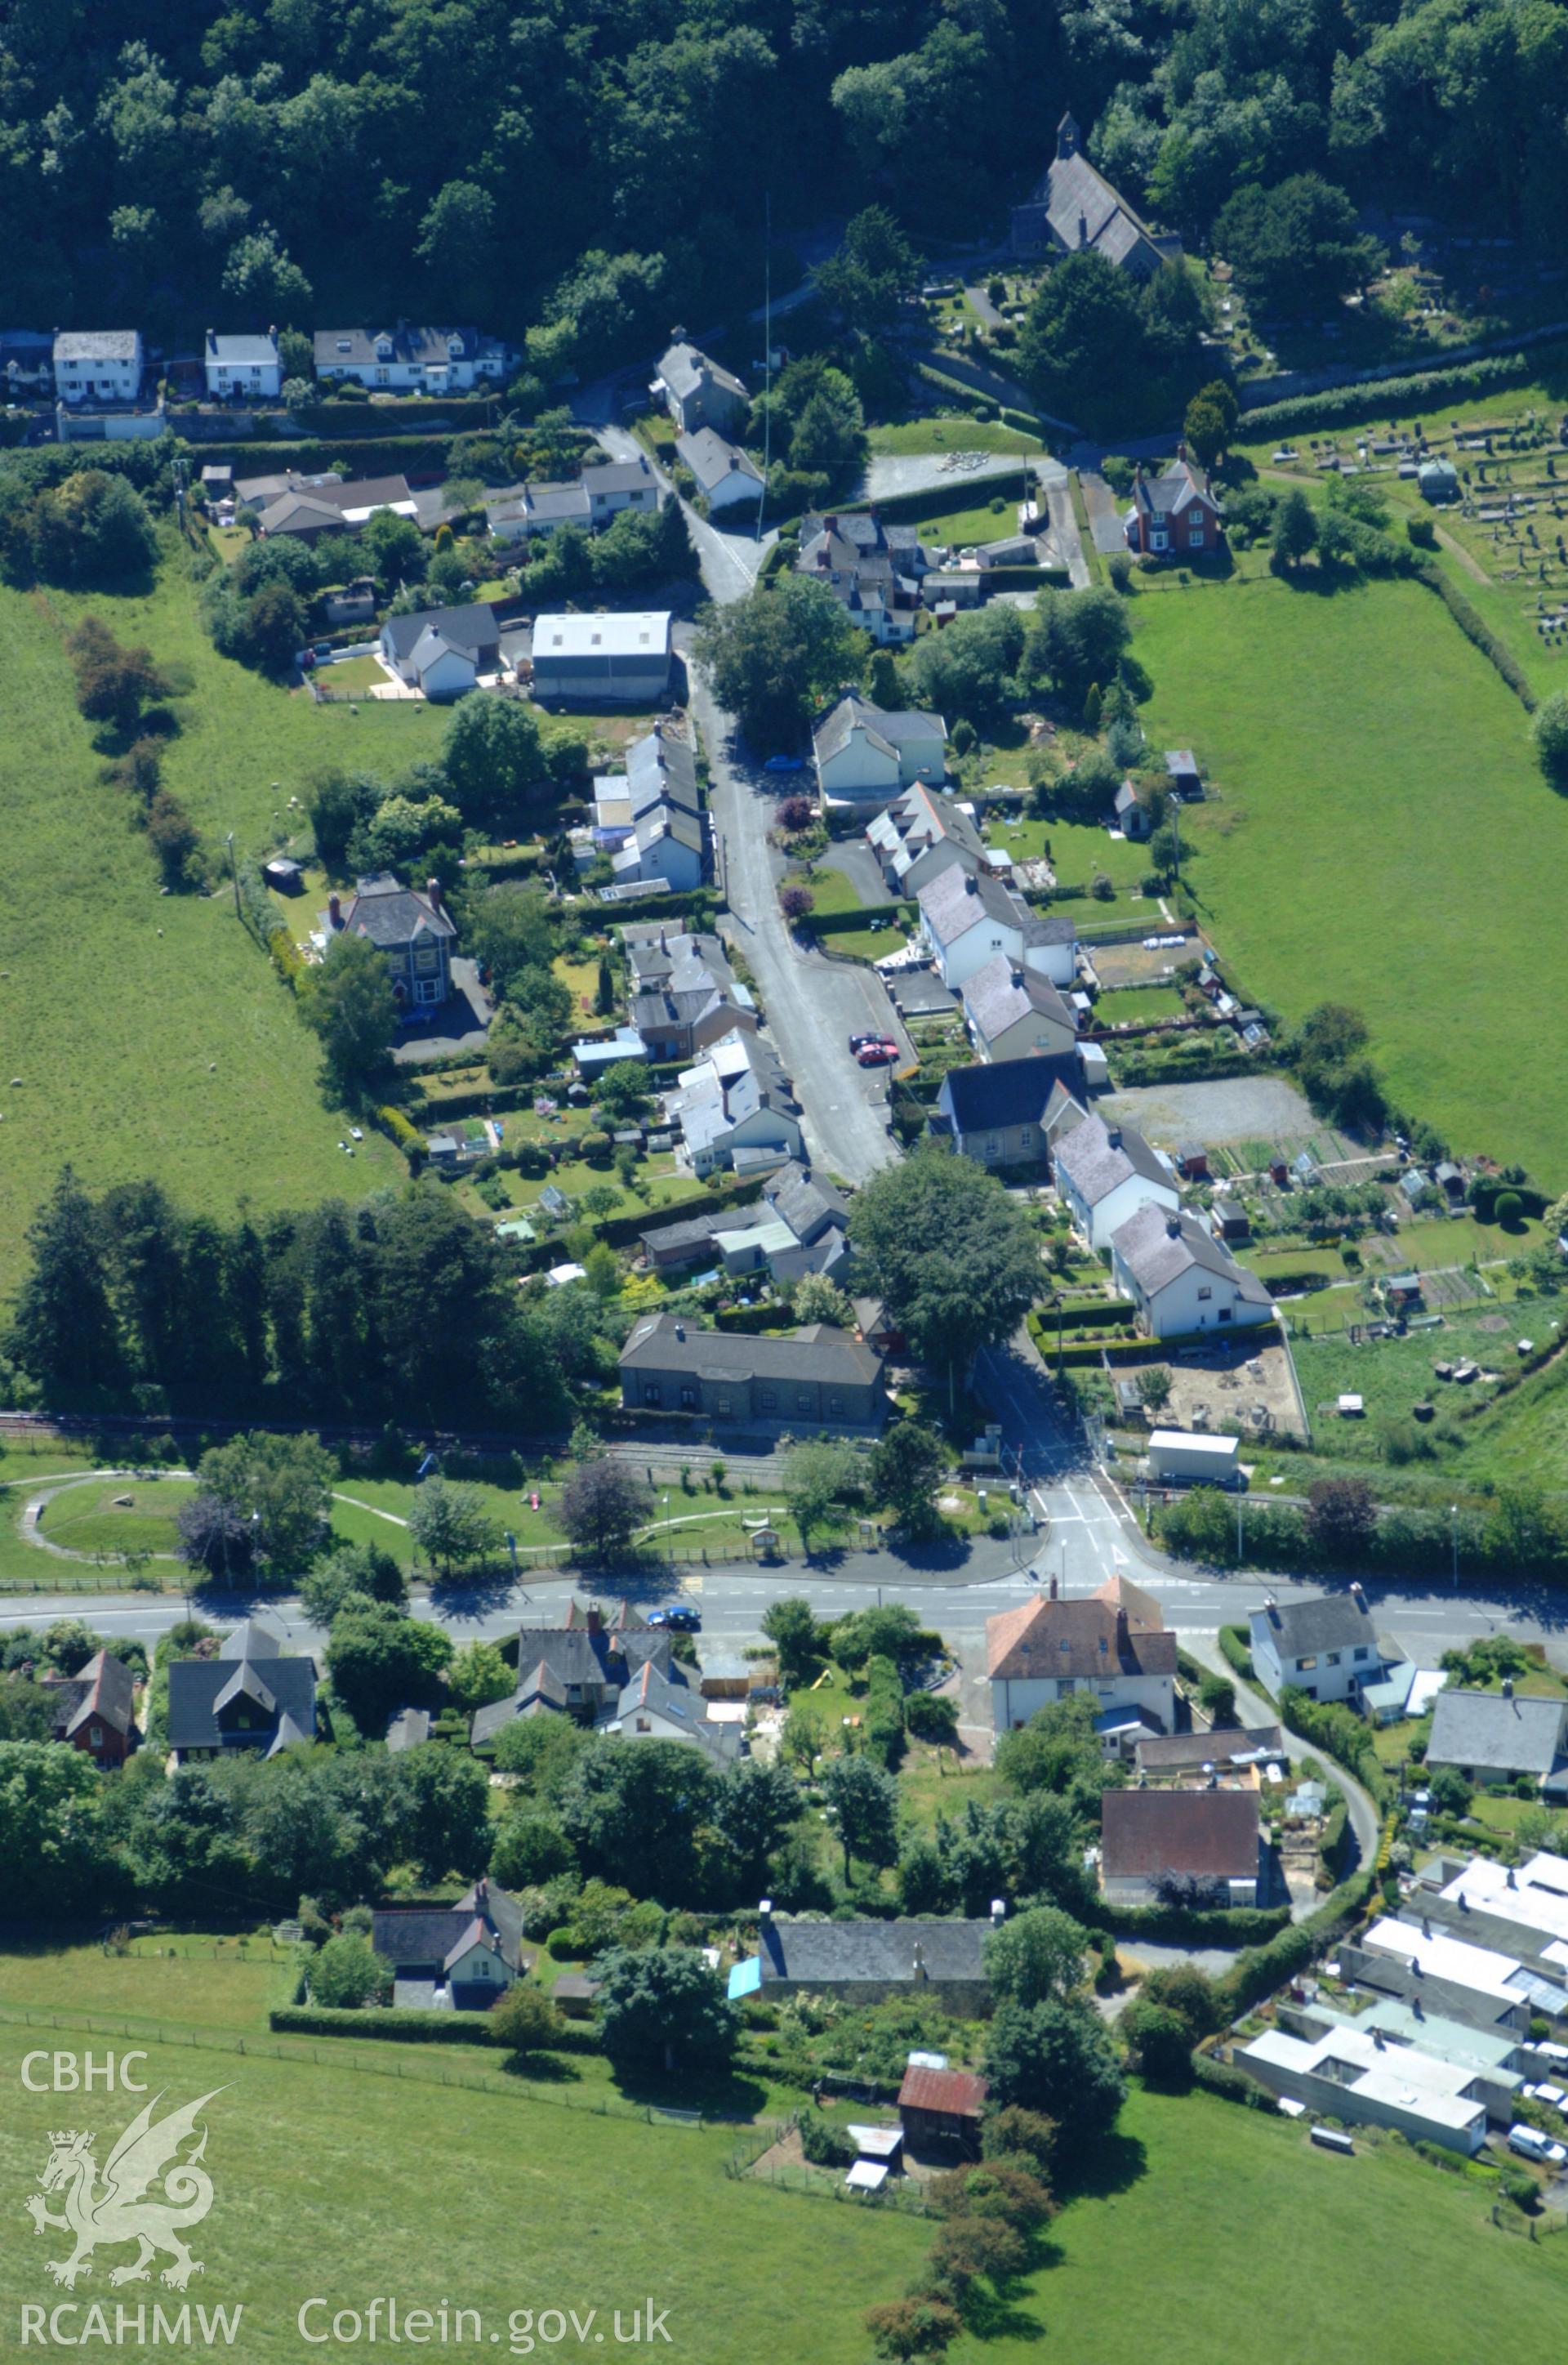 RCAHMW colour oblique aerial photograph of Llanfihangel Railway Station and village. Taken on 14 June 2004 by Toby Driver